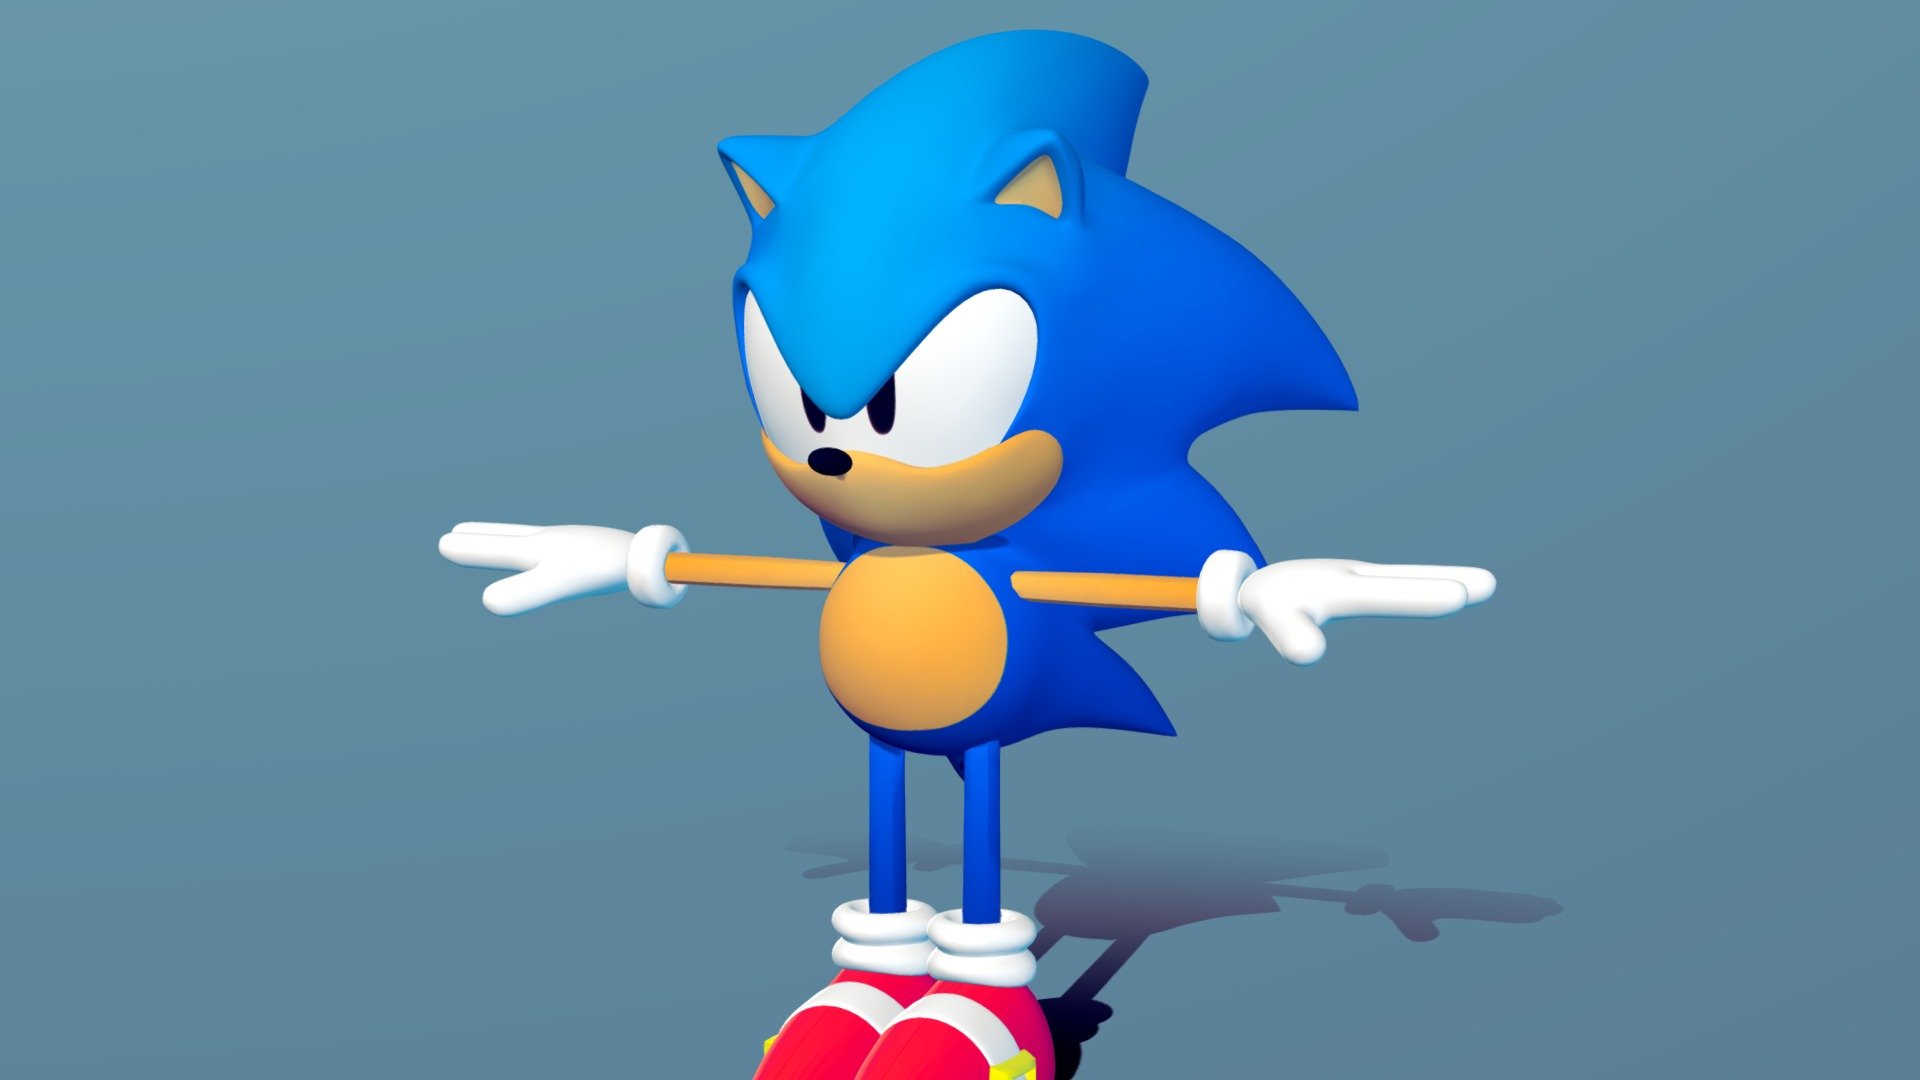 This is the sonic yamaguchi design

I took as reference the 2d image and a 3d model by Snoc++ and FolksyWig - yamaguchi sonic - 3D model by Gabrielgt16 3d model